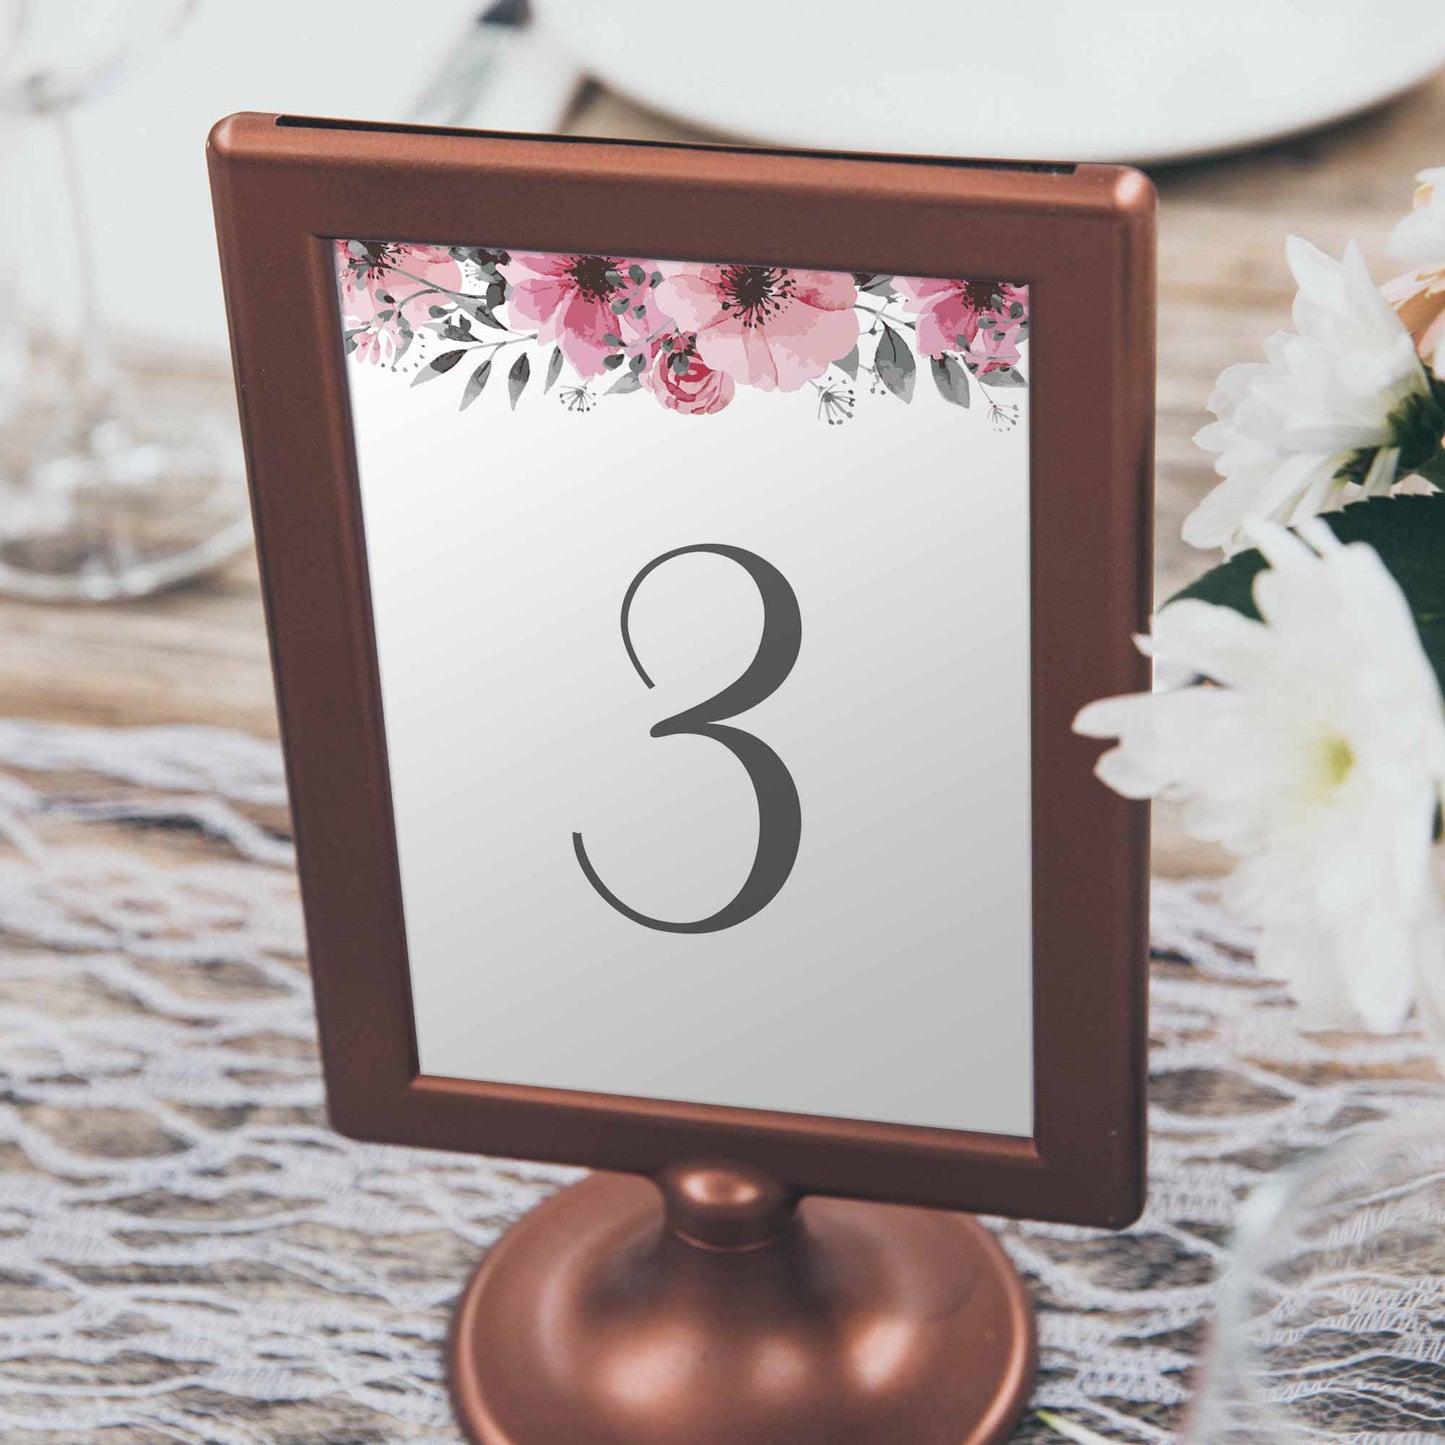 floral table numbers showing wedding table decor